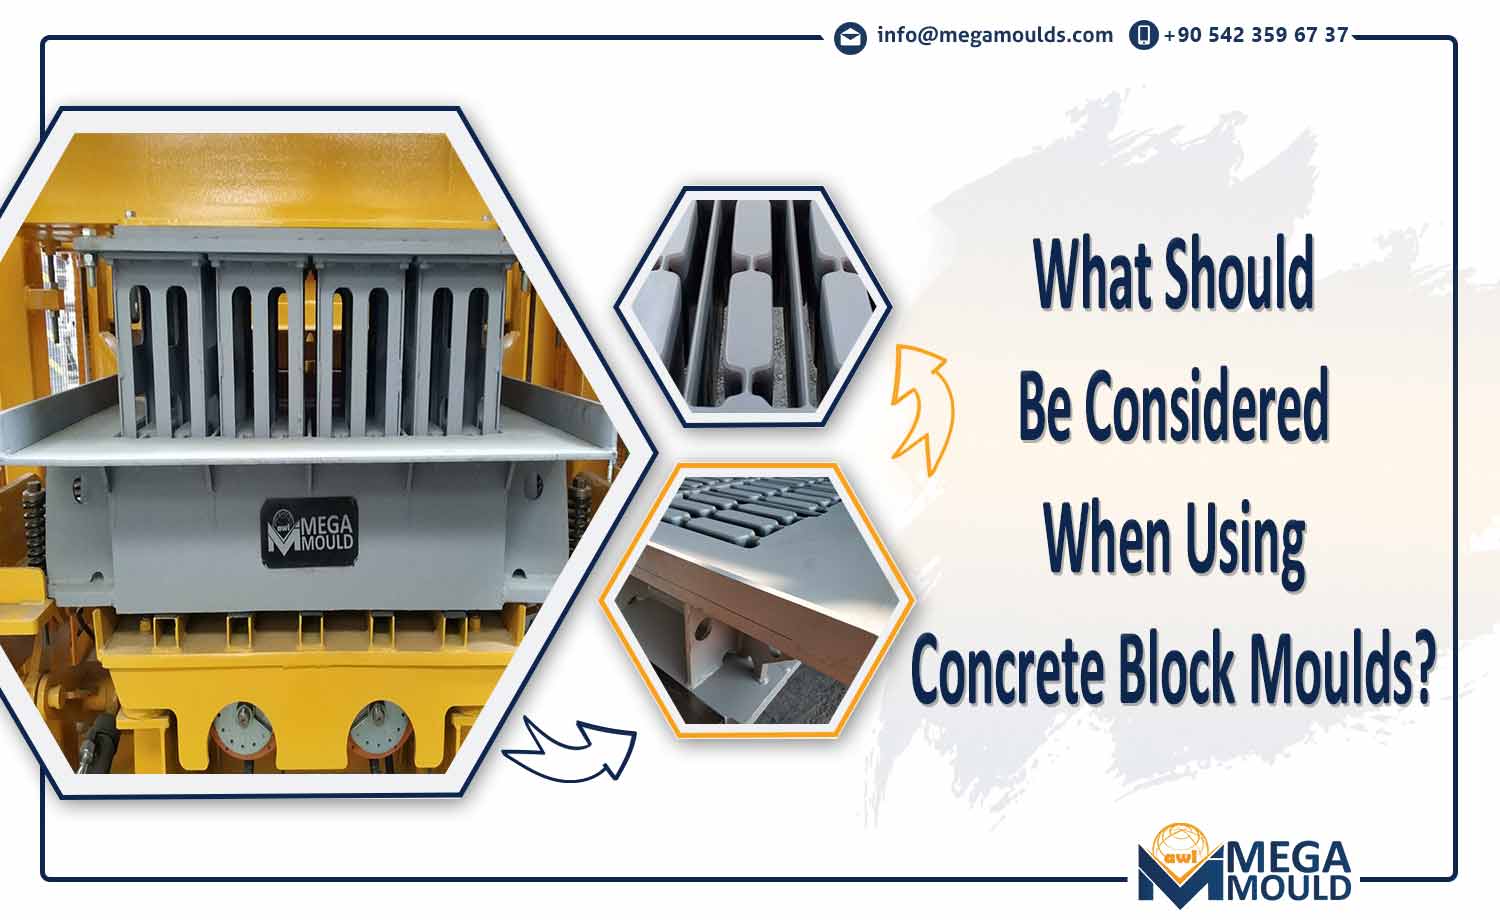 What Should Be Considered When Using Concrete Block Moulds?